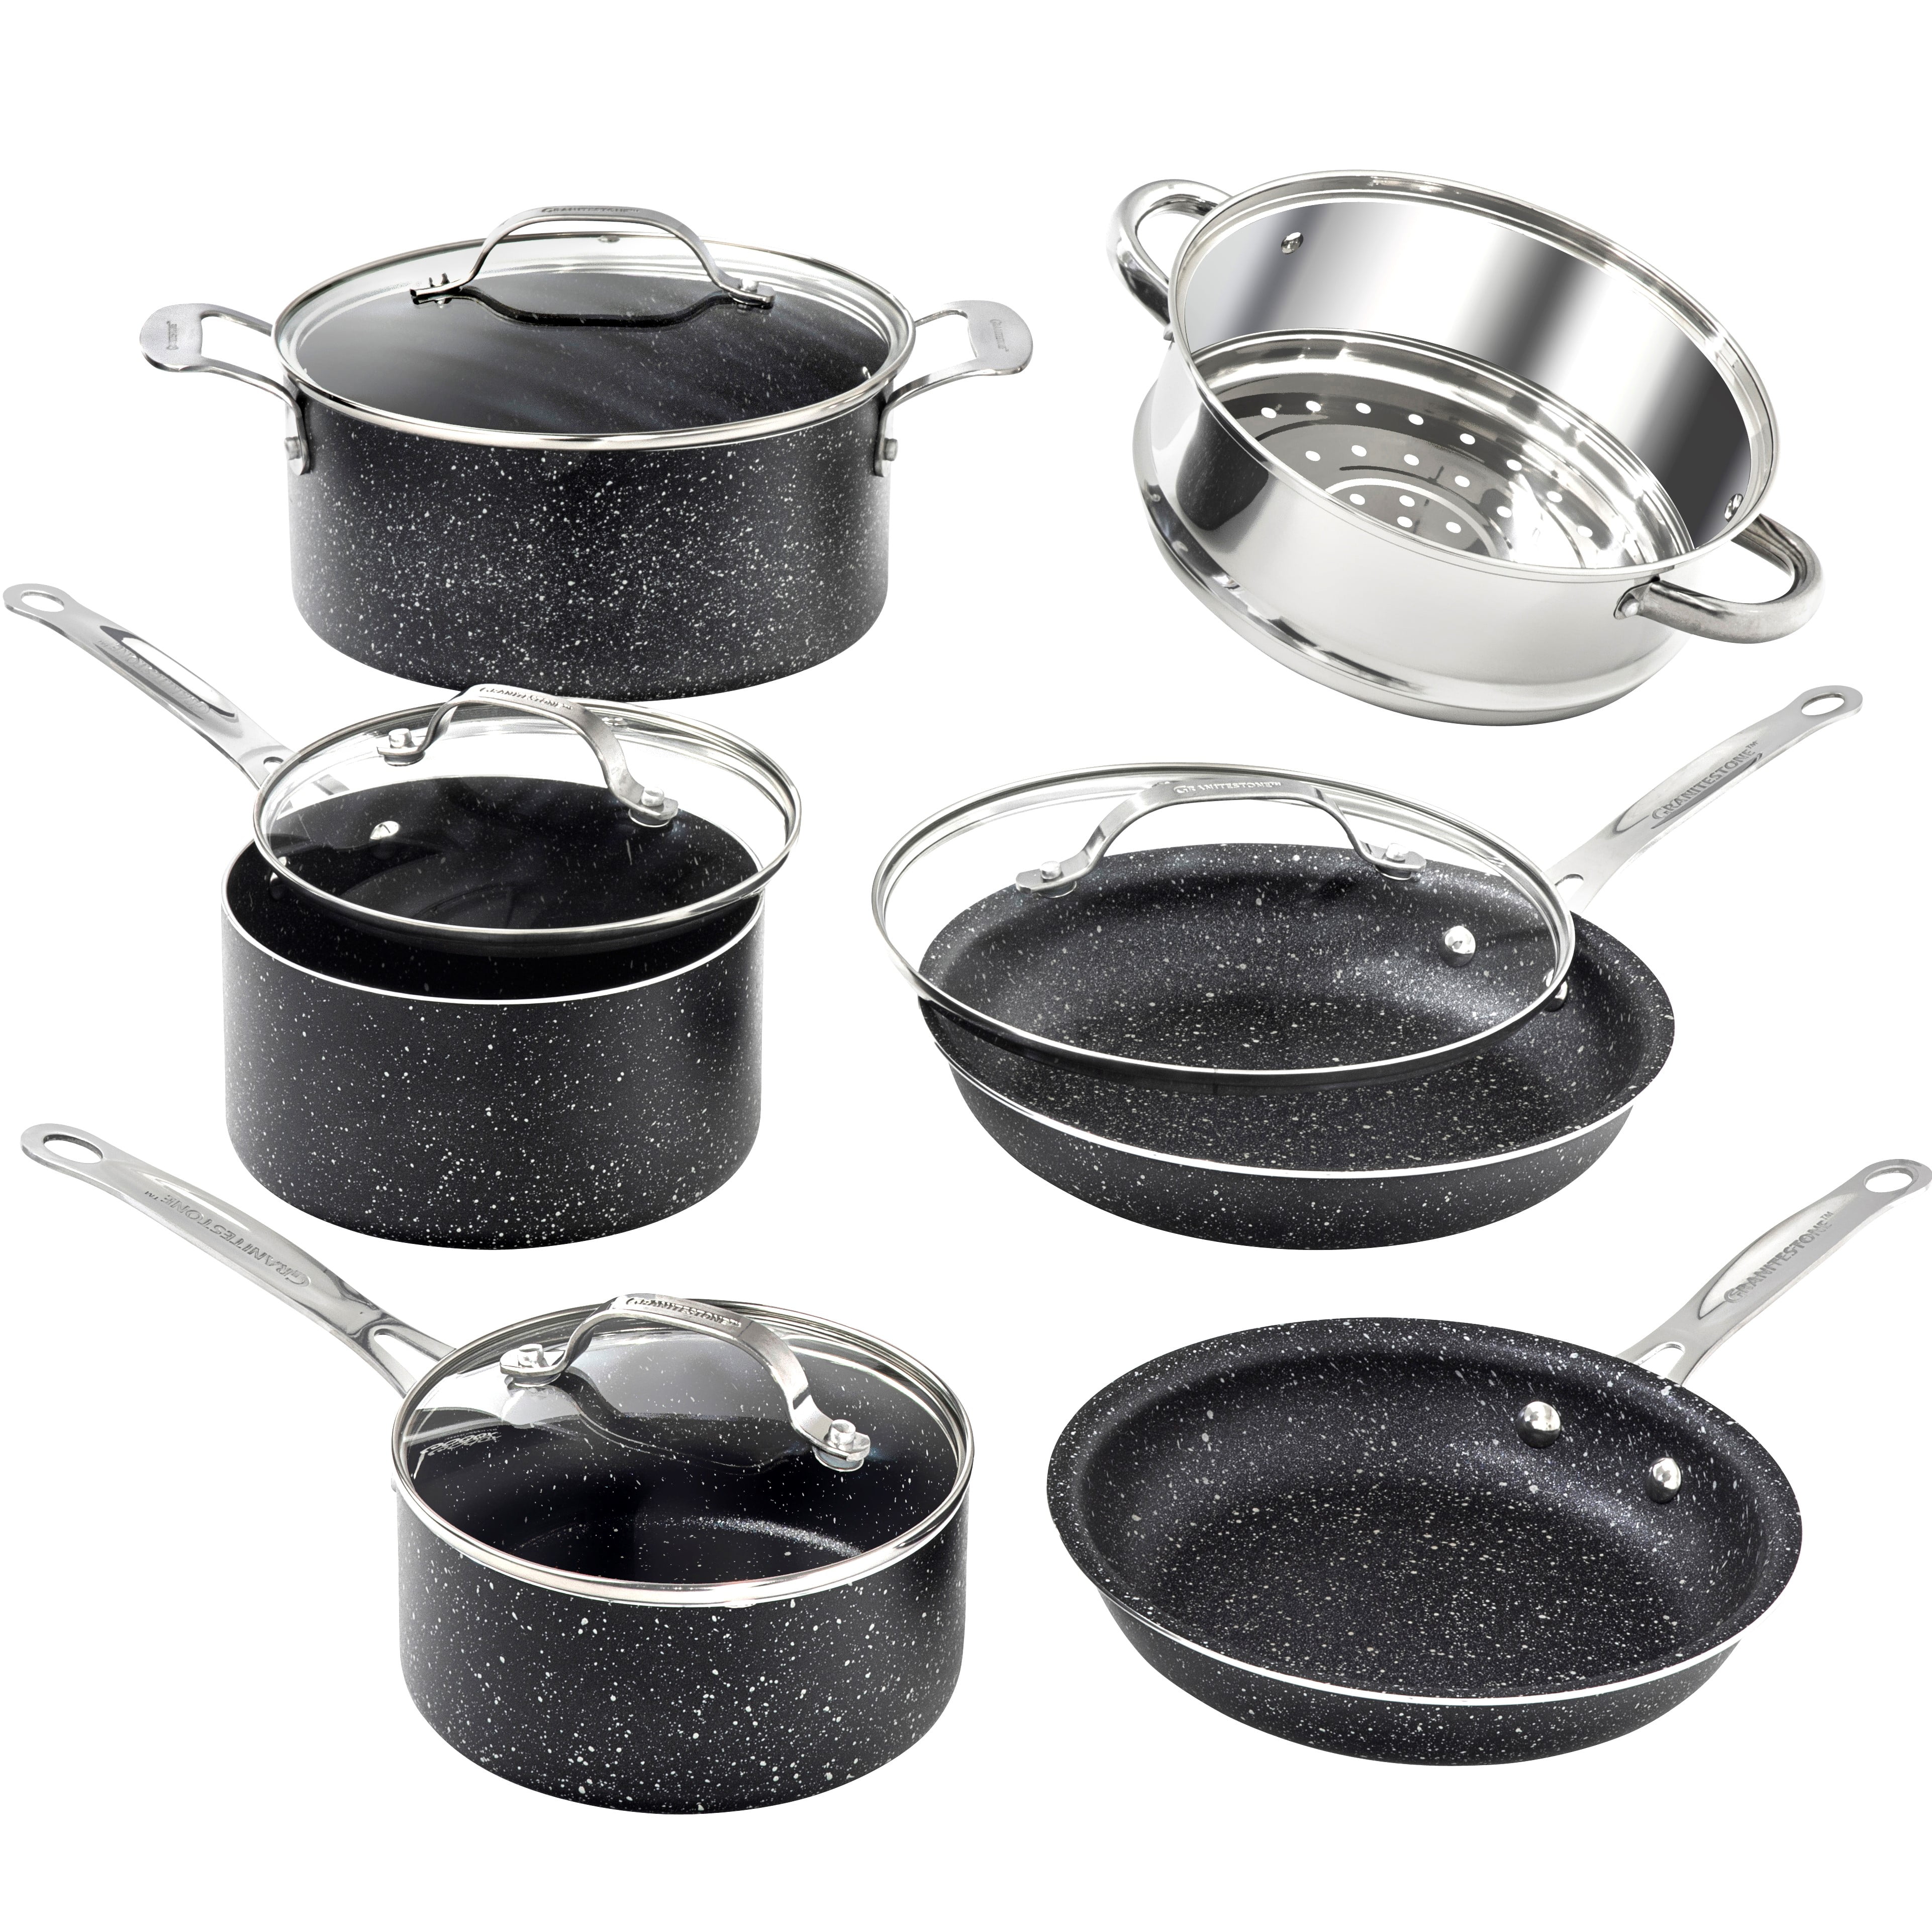 Wm1761 for sale online Thyme & Table Non-stick 12 Piece Gold Pots and Pans Cookware Set 